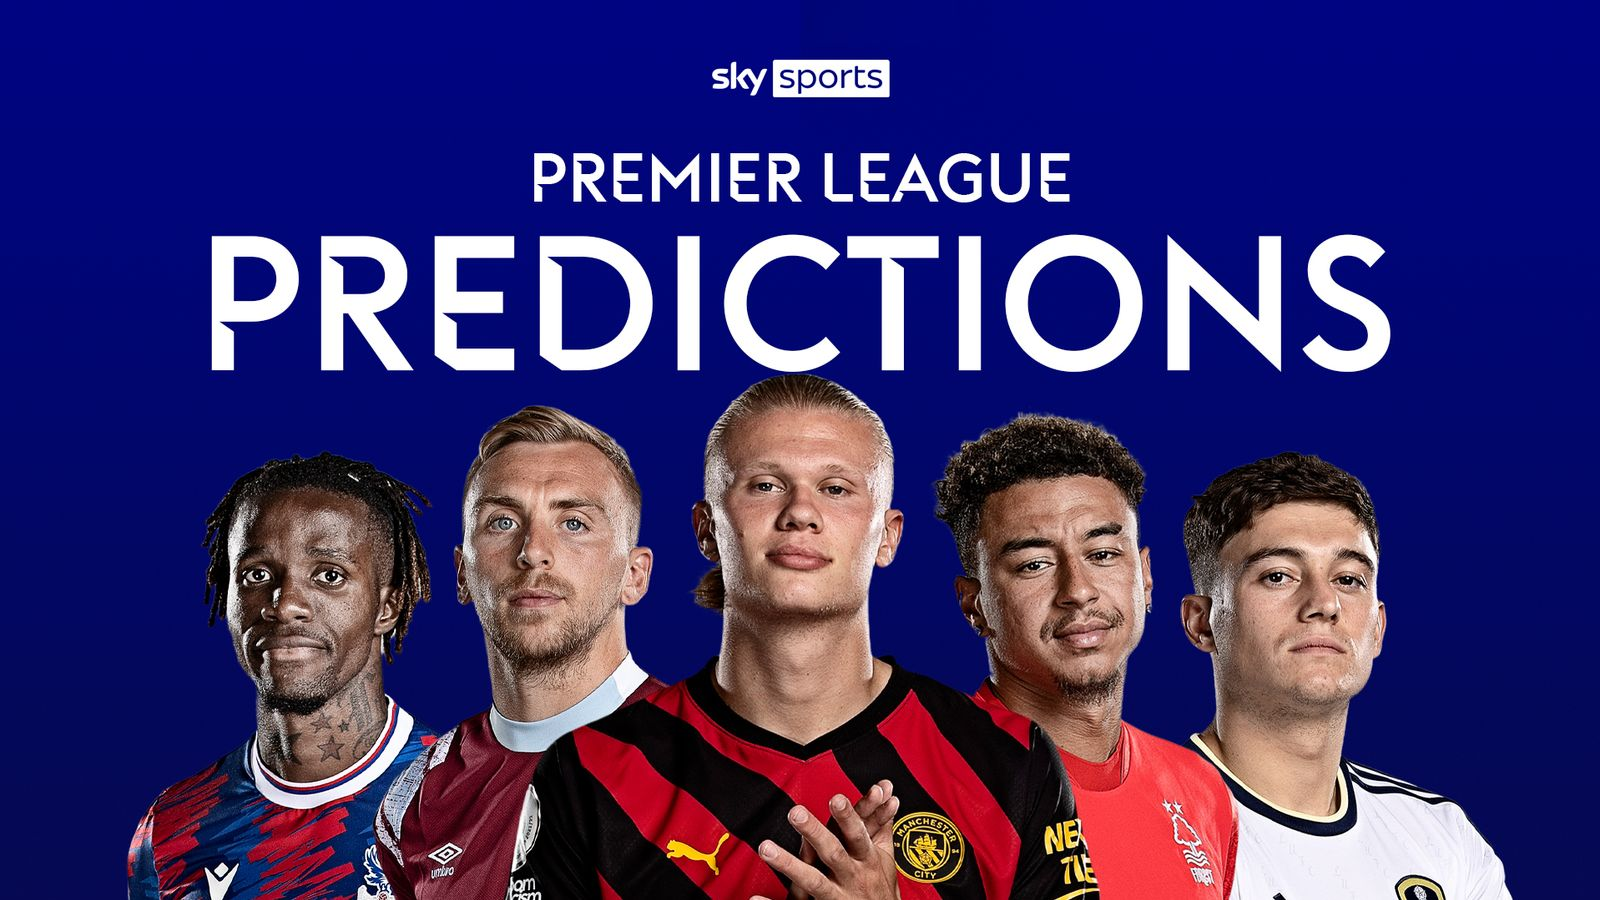 Premier League predictions: They accumulated a total of 52 points during the previous season, which resulted in a poor eighth-place finish in the Premier League.